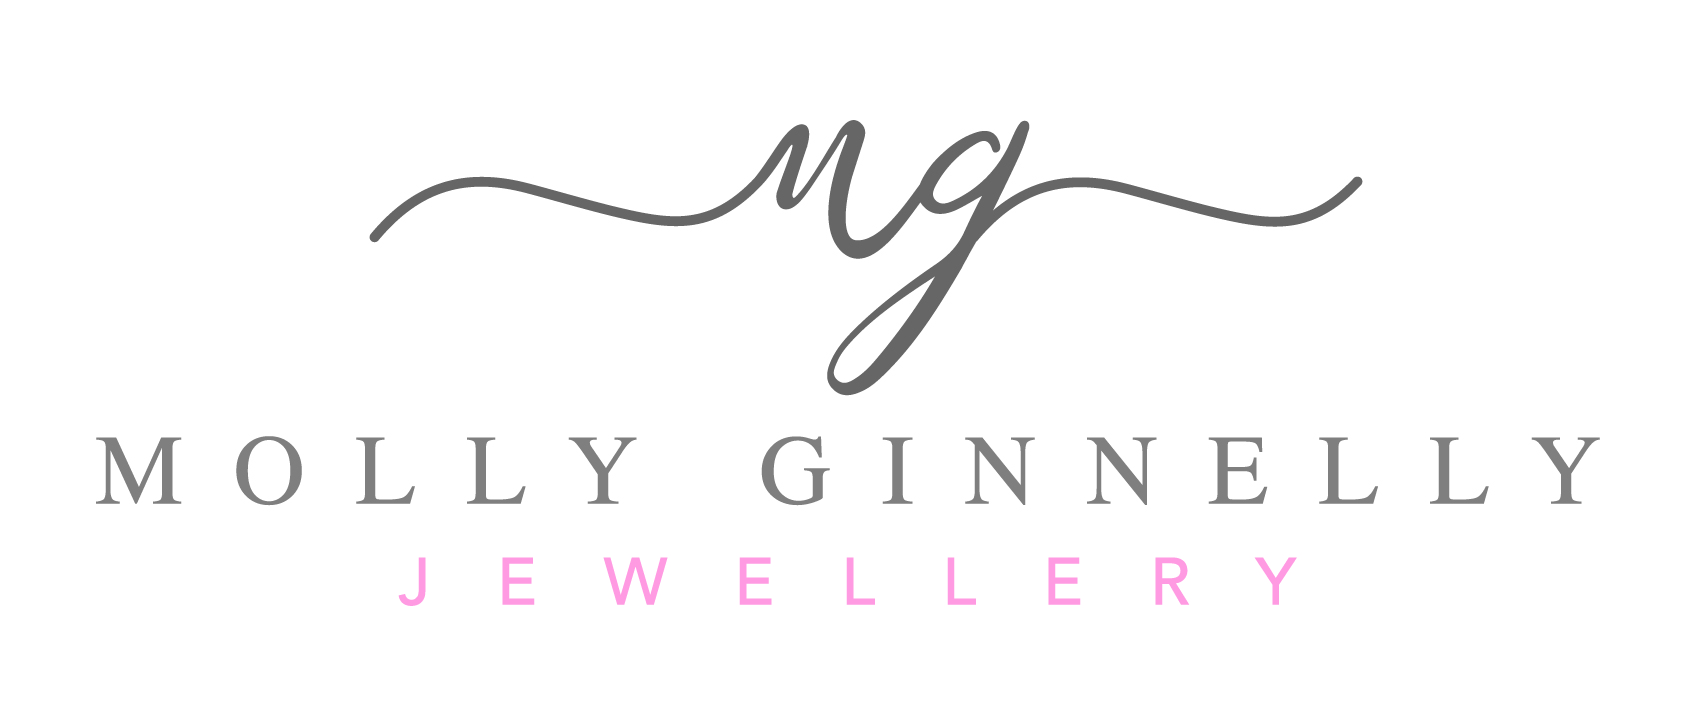 molly ginnelly jewellery | storefront | notonthehighstreet.com